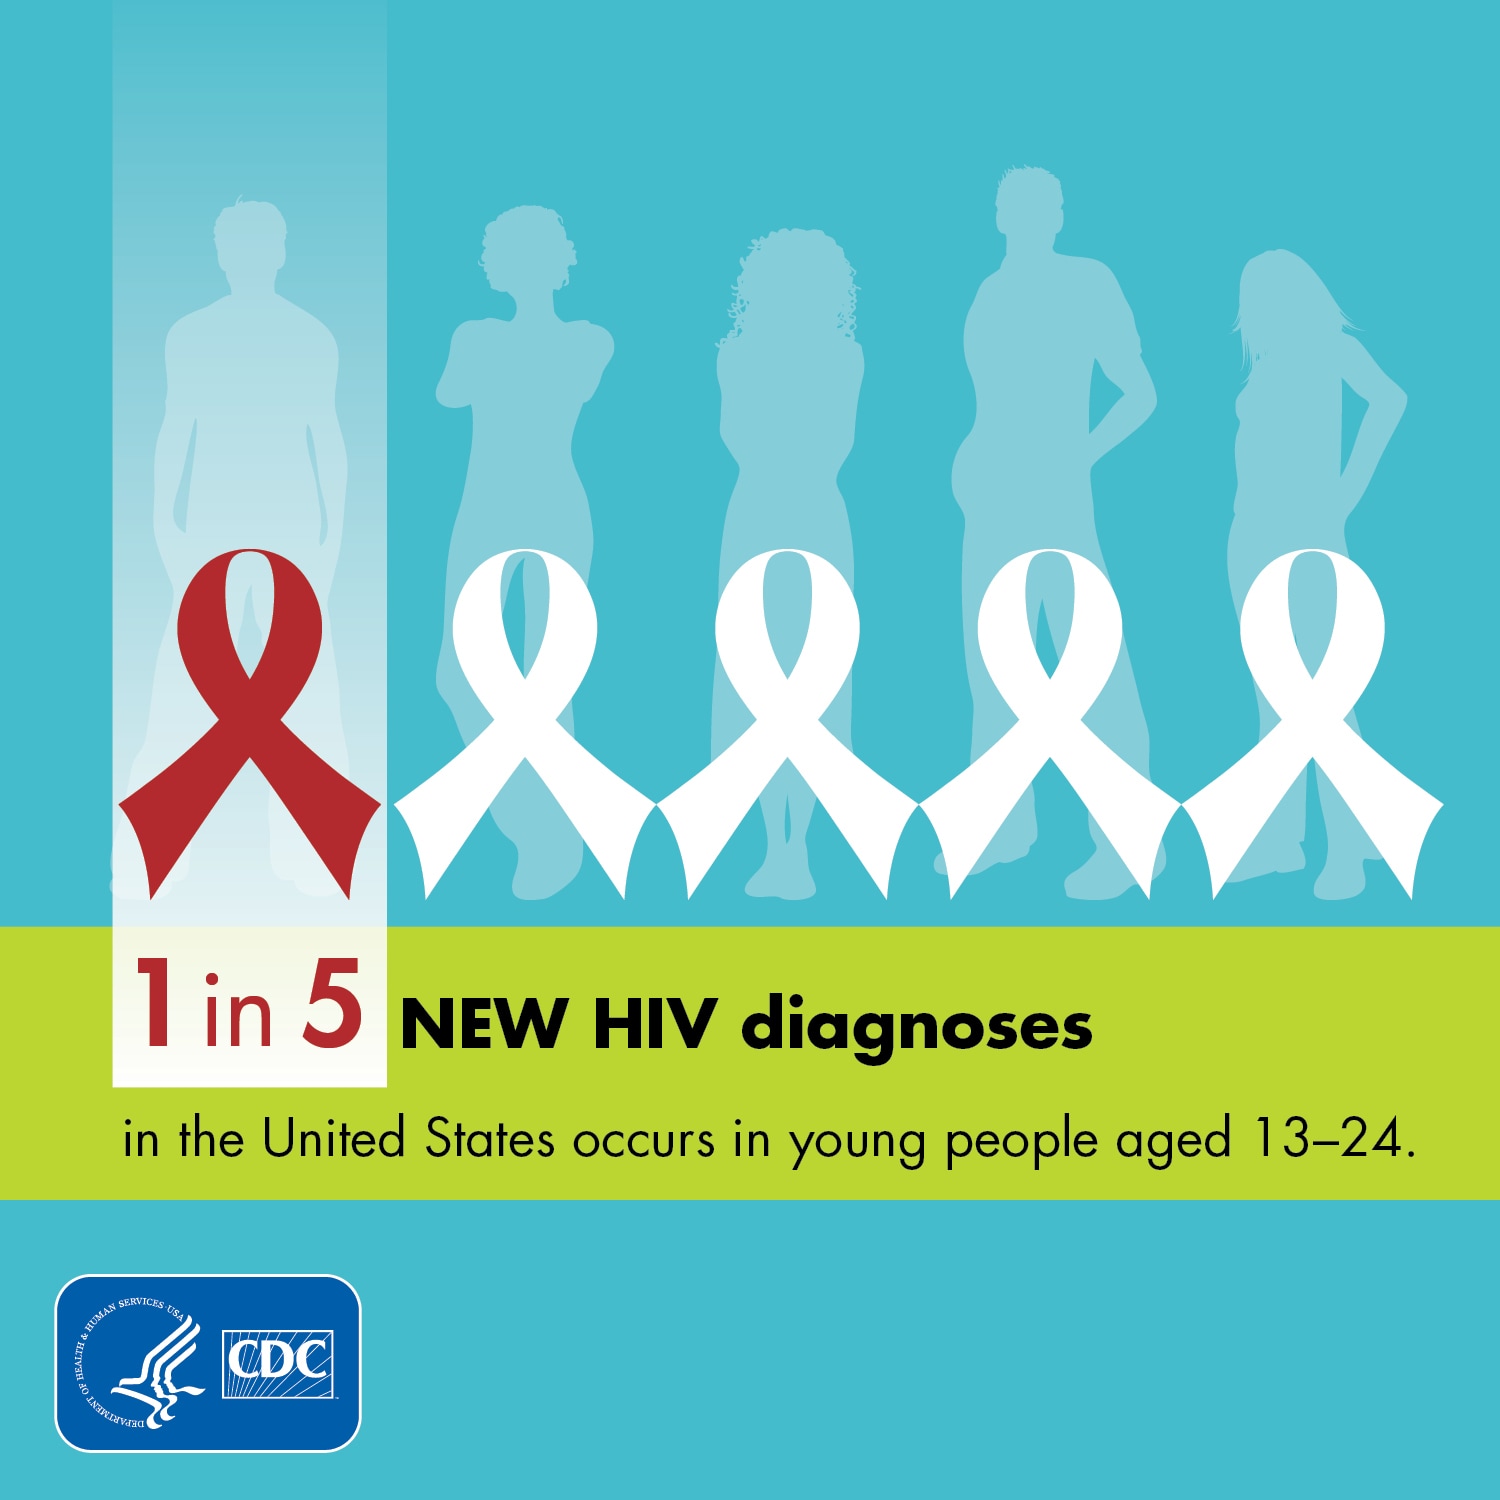 1 in 5 new HIV diagnoses occurs in young people ages 13-24.